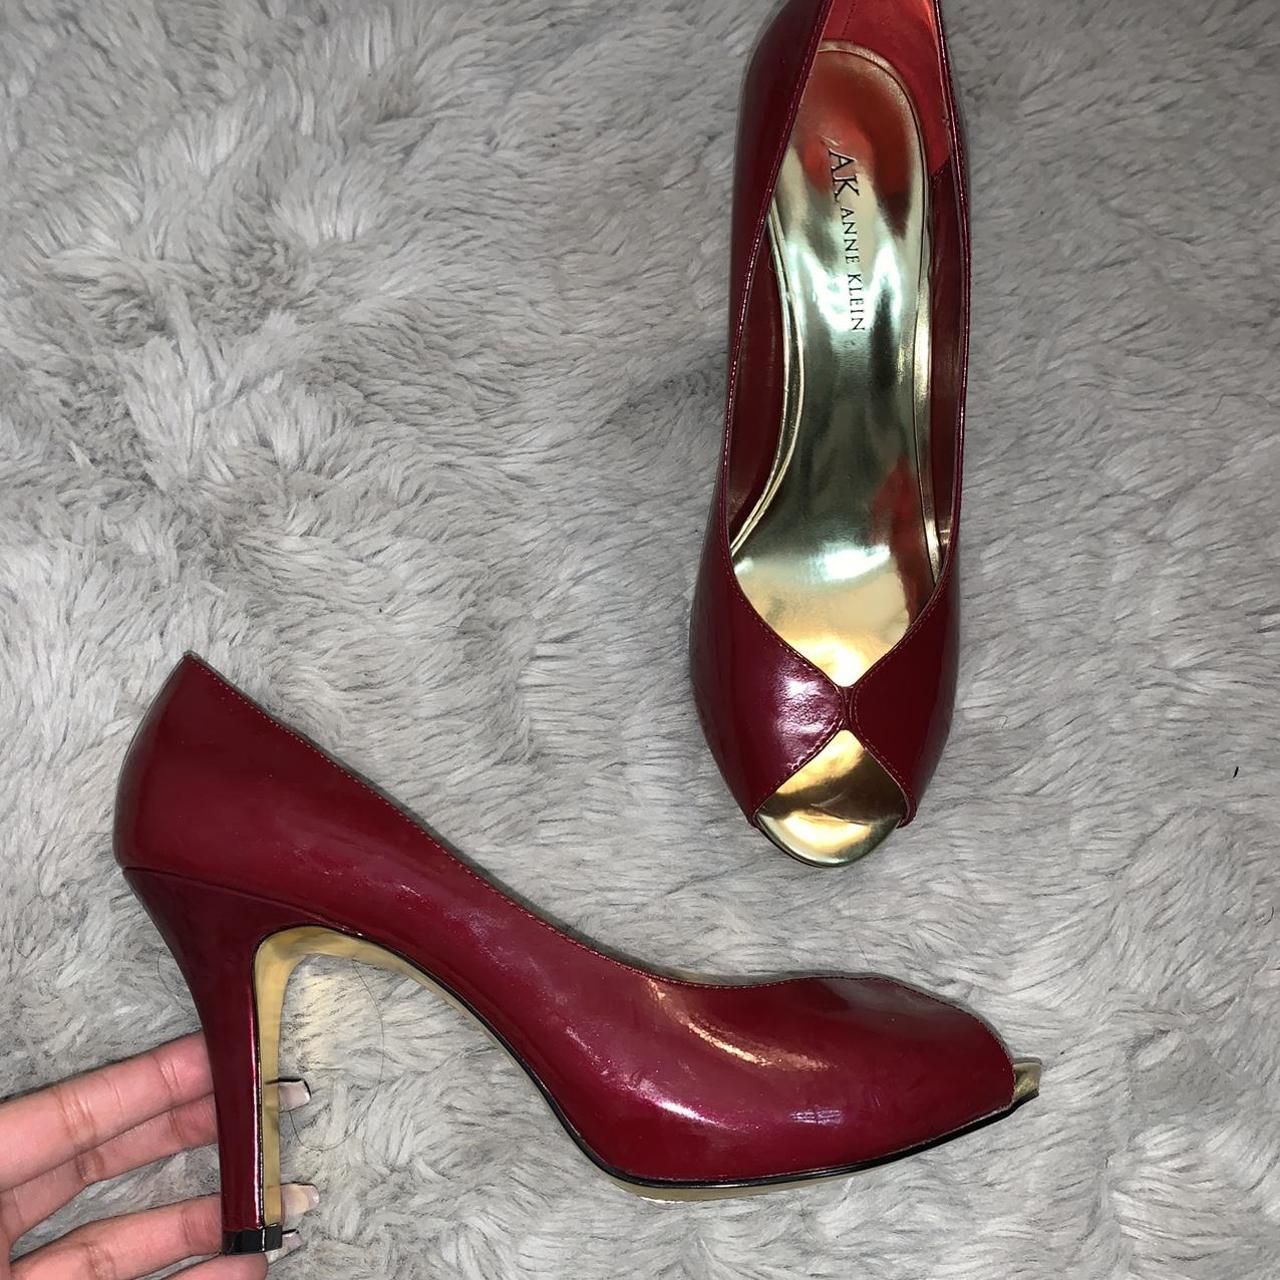 Cute red and gold statement heels - Depop